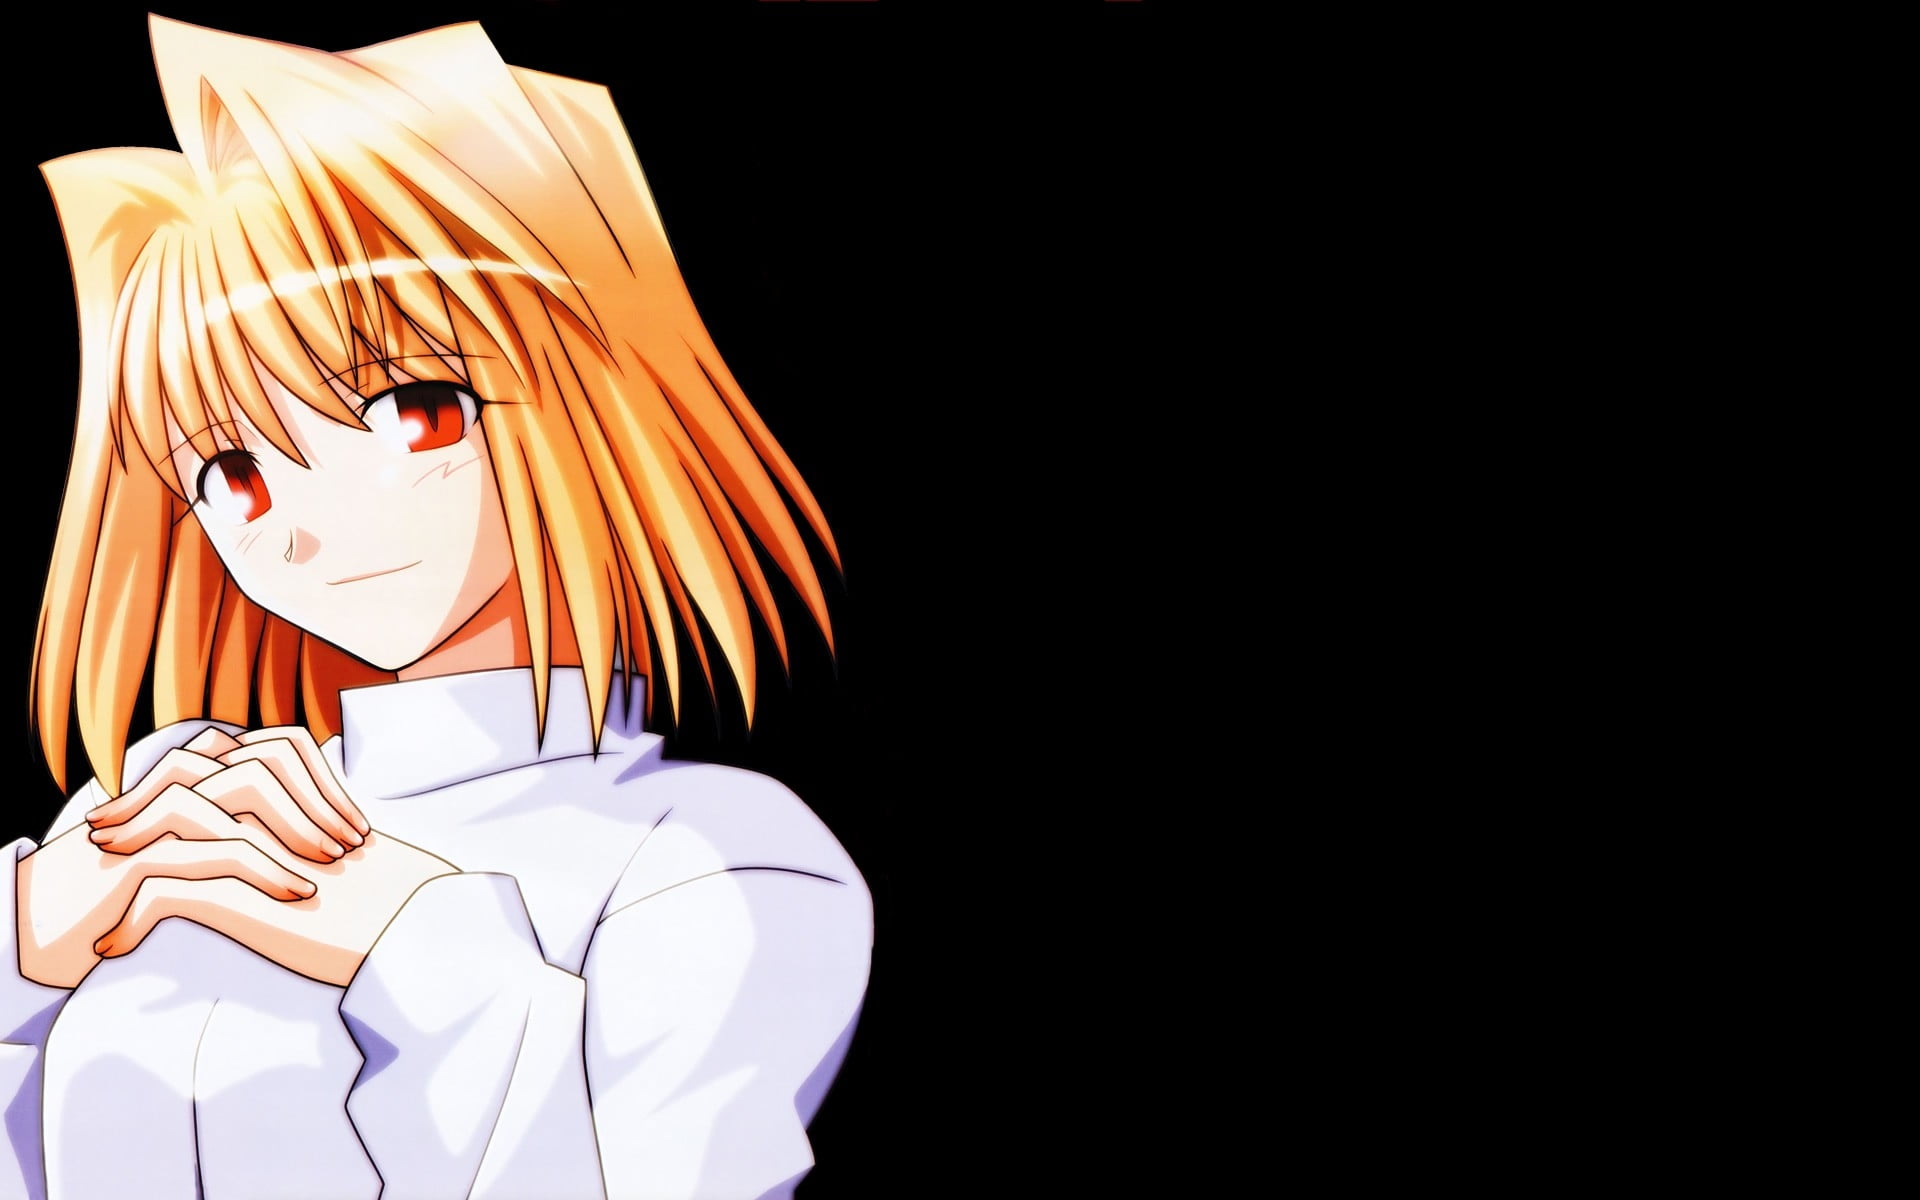 blonde haired girl anime character in white top